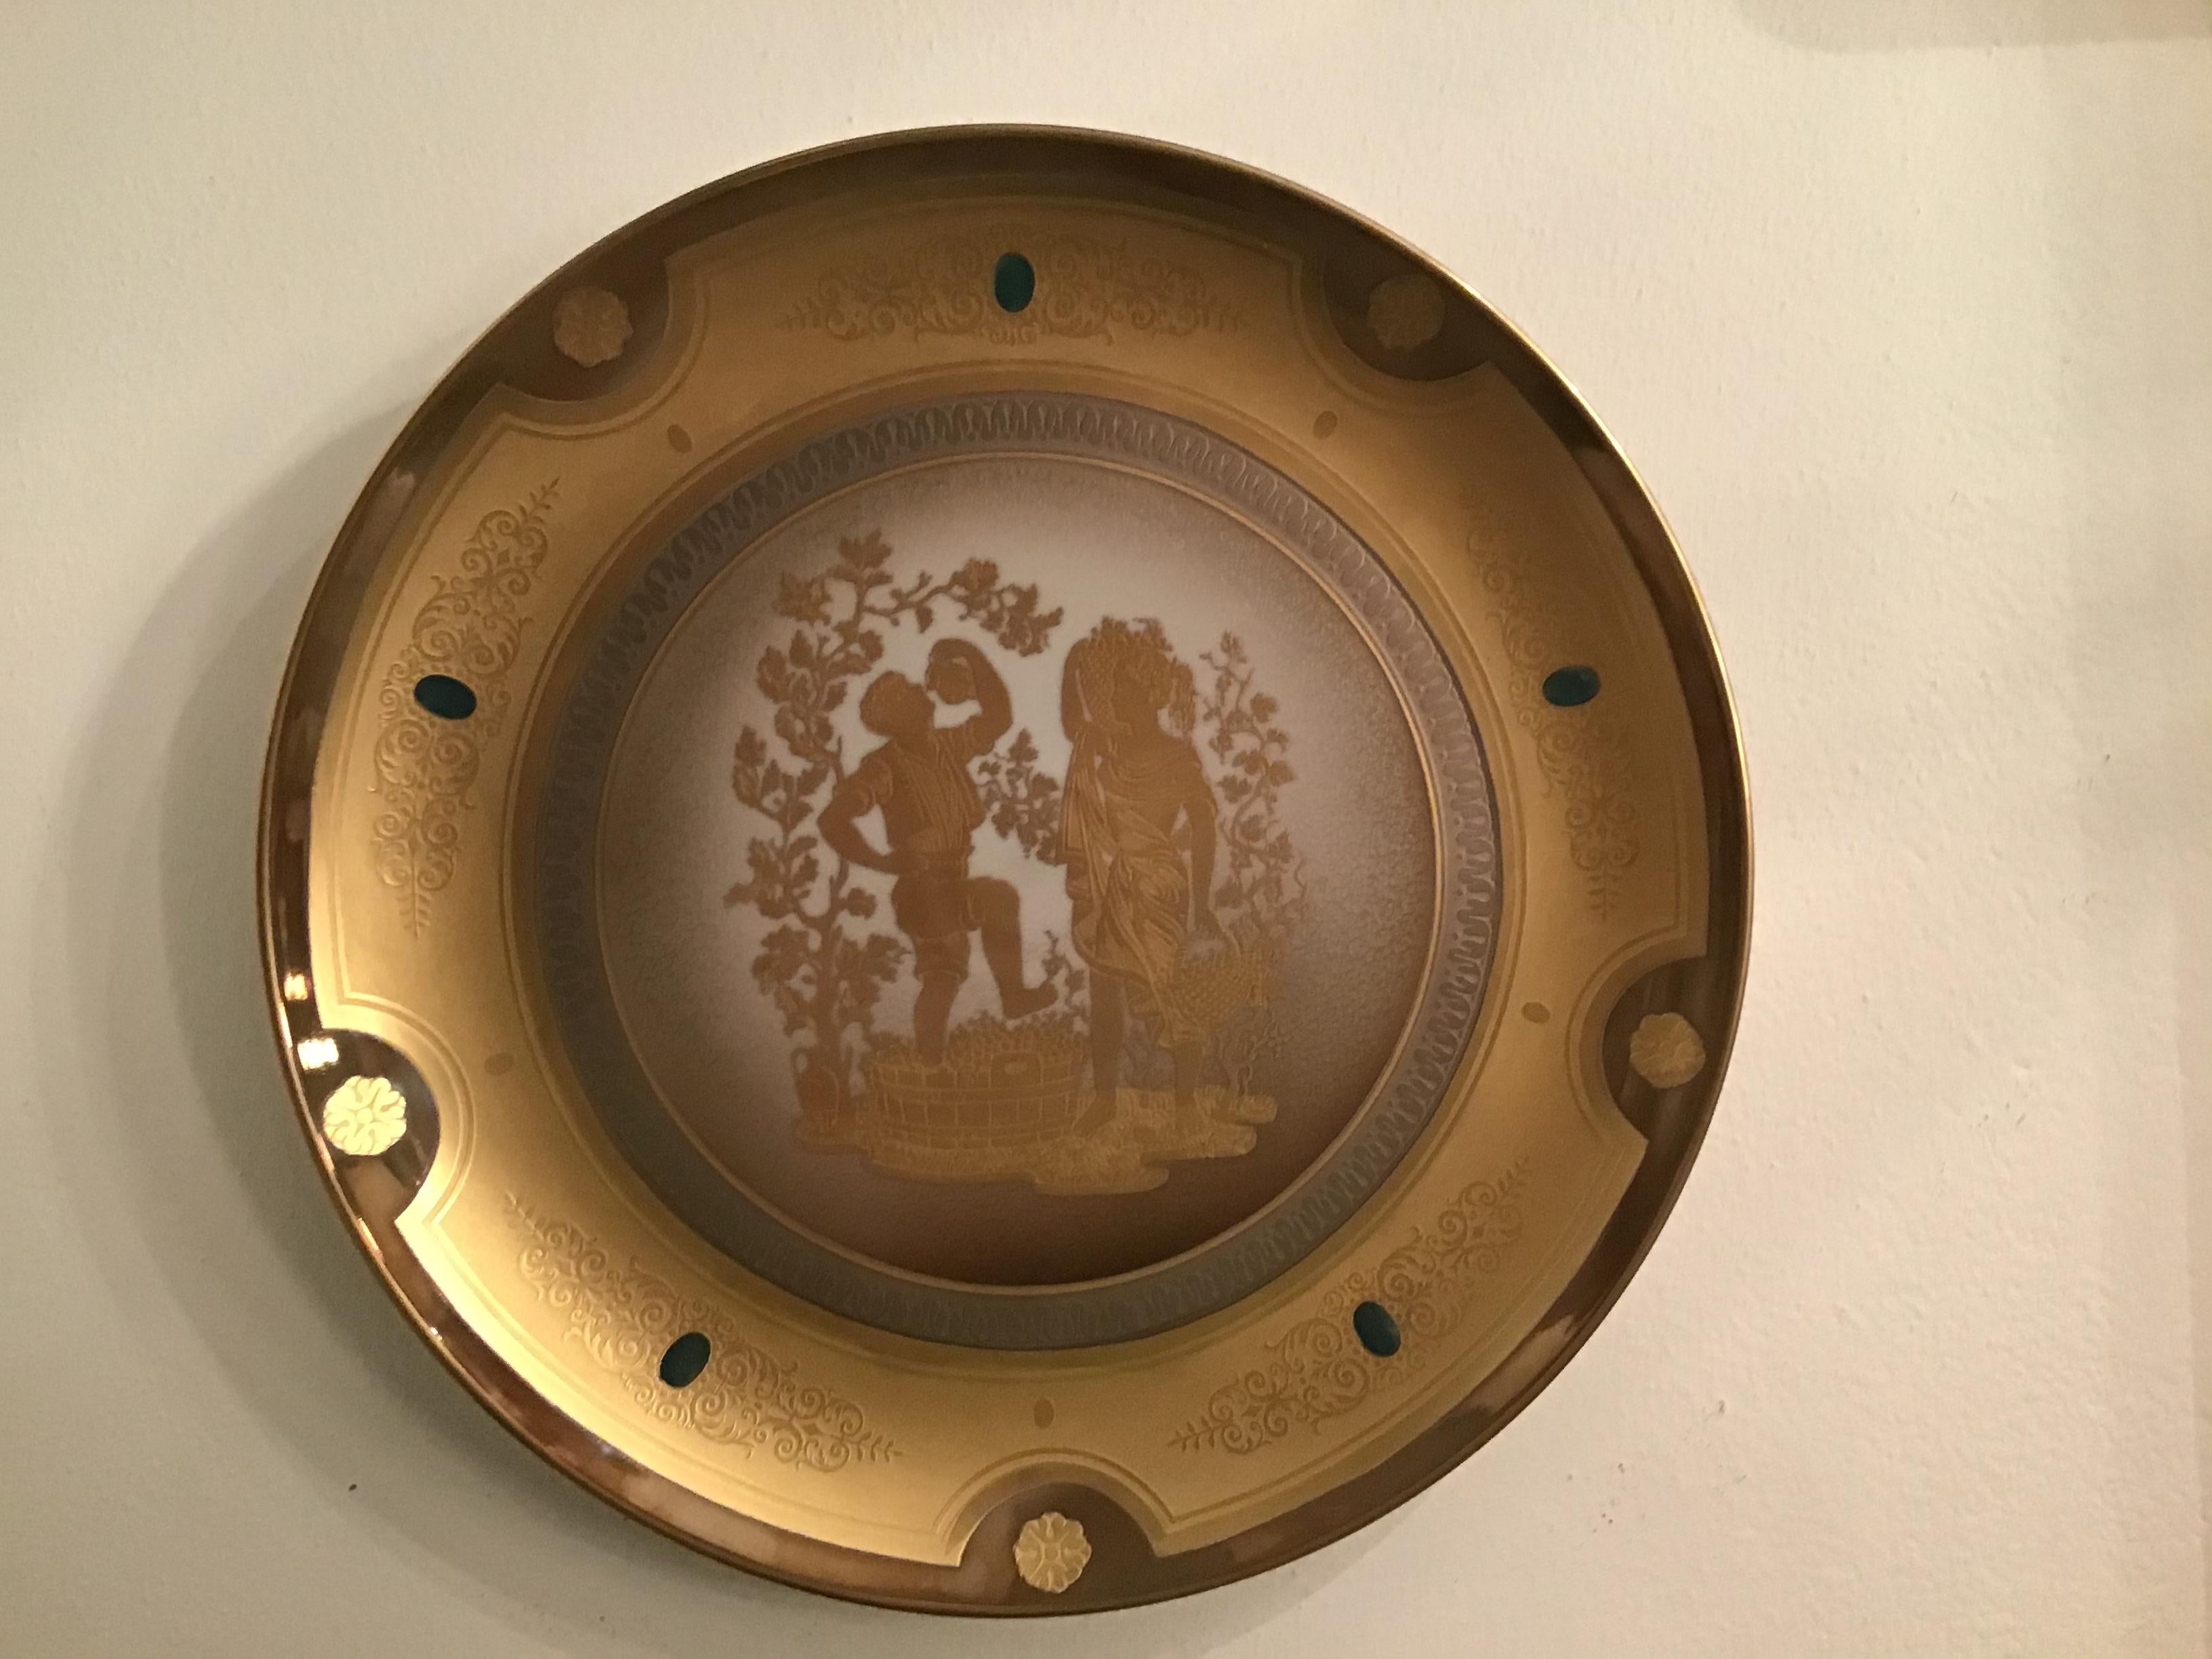 Morbelli Porcelain Wall Plate Gold “ Autunno”, 1960, Italy For Sale 2